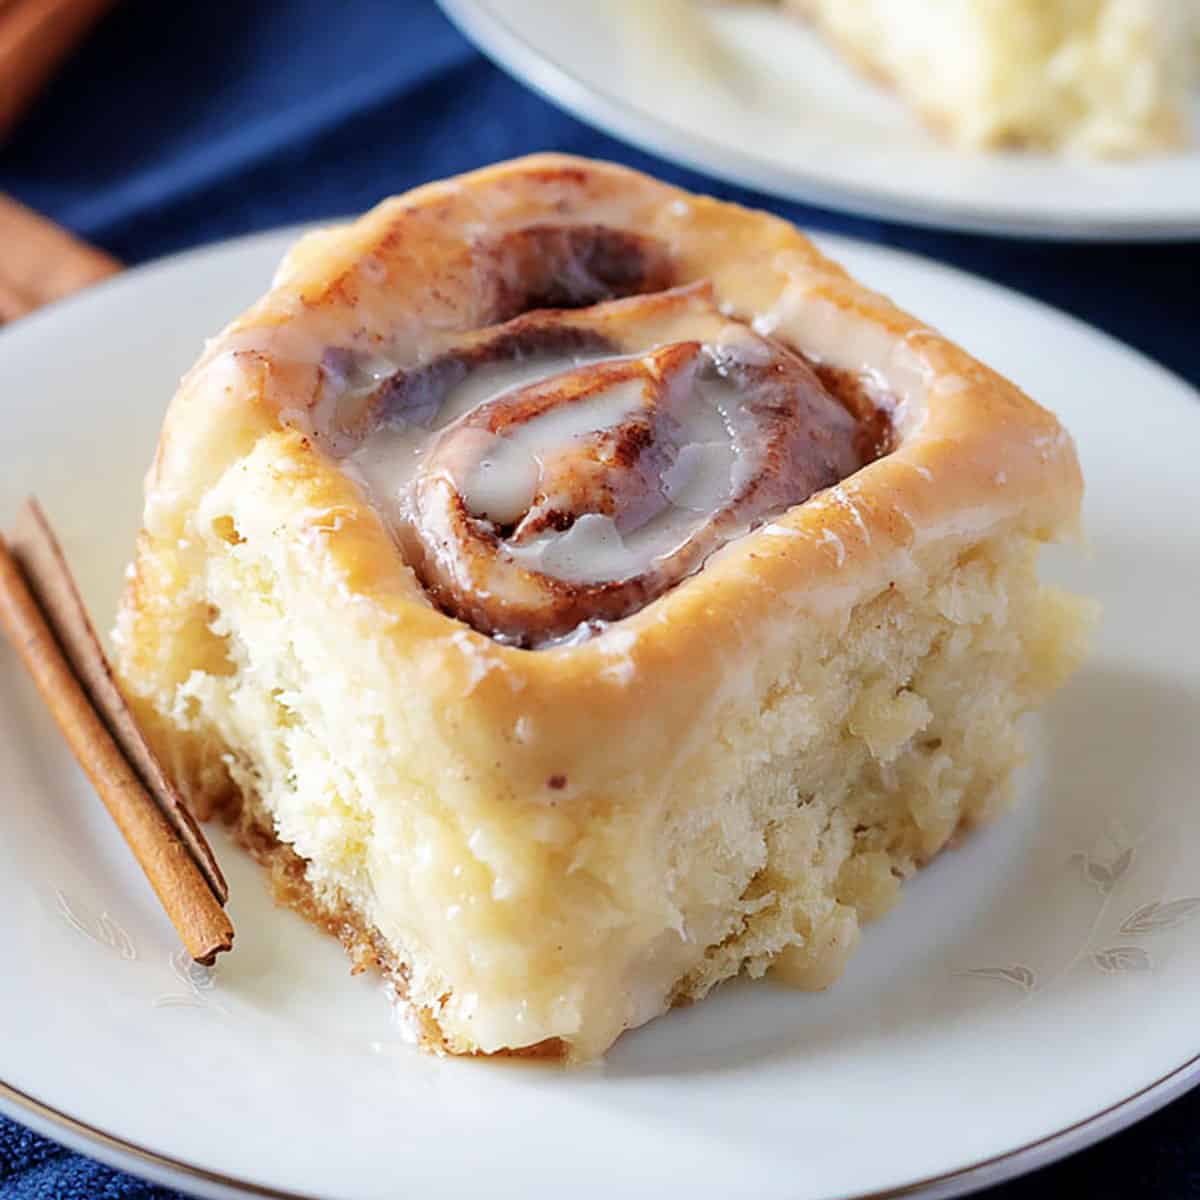 Homemade cinnamon roll on a plate with a cinnamon stick.